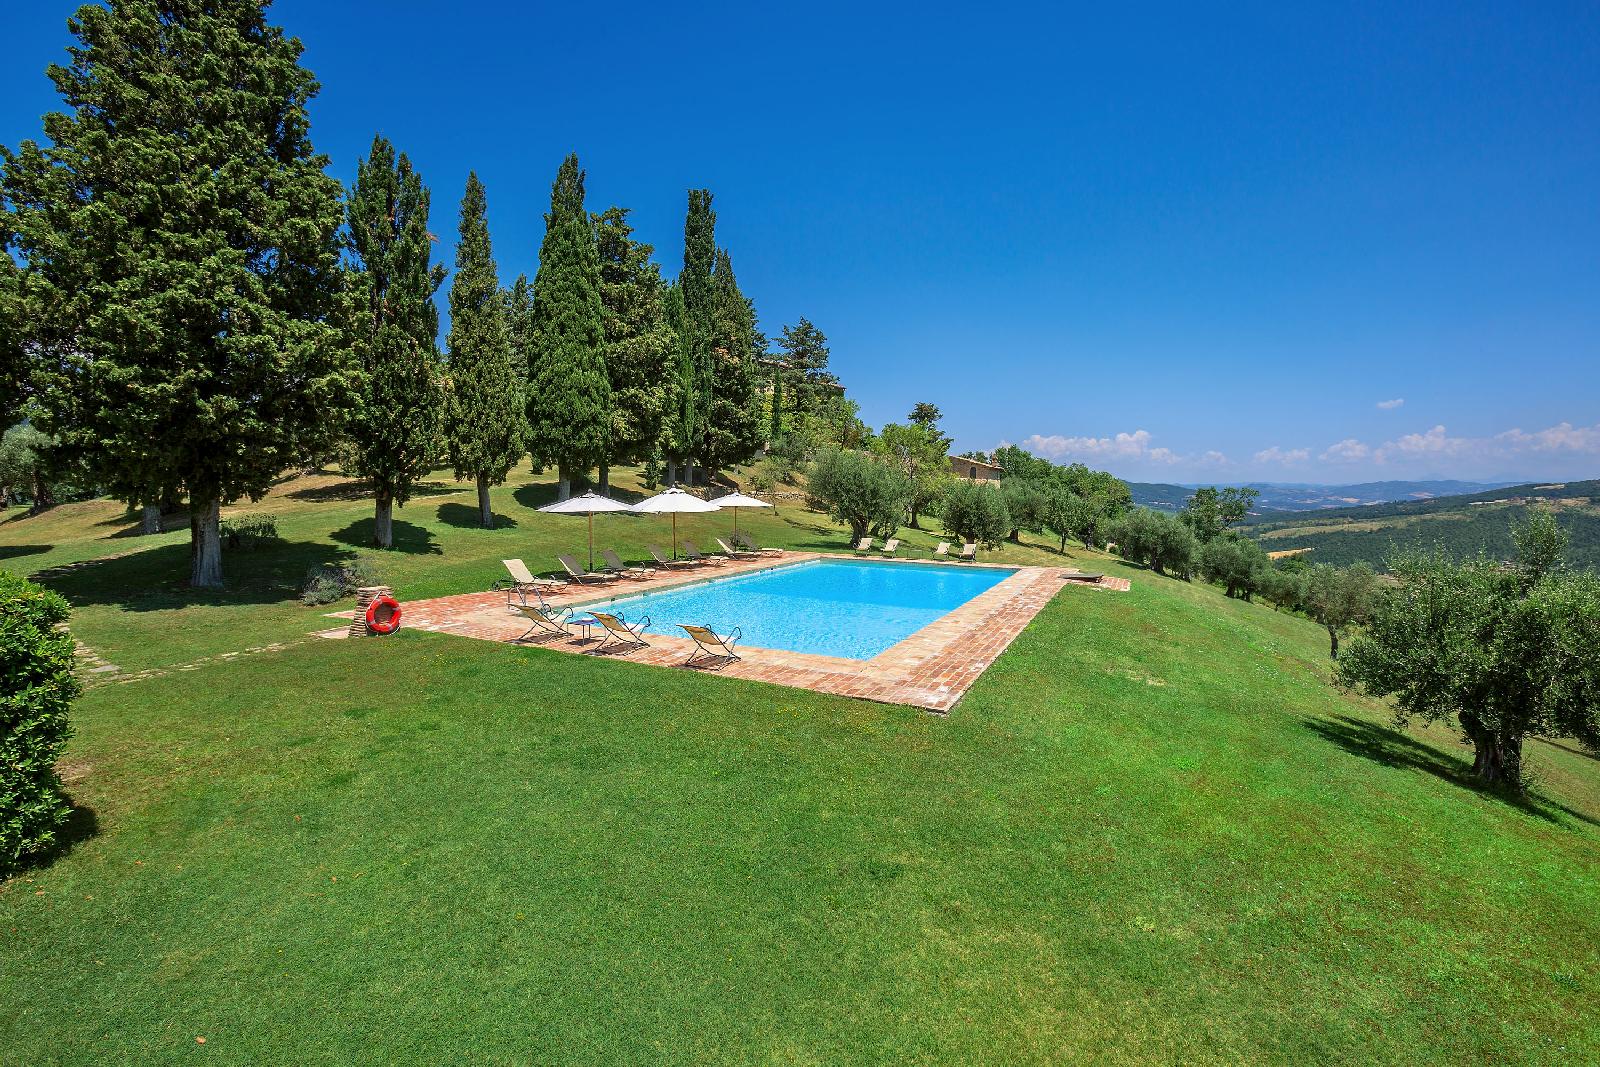 The swimming pool with a great view from Villa l'Edera, Umbria